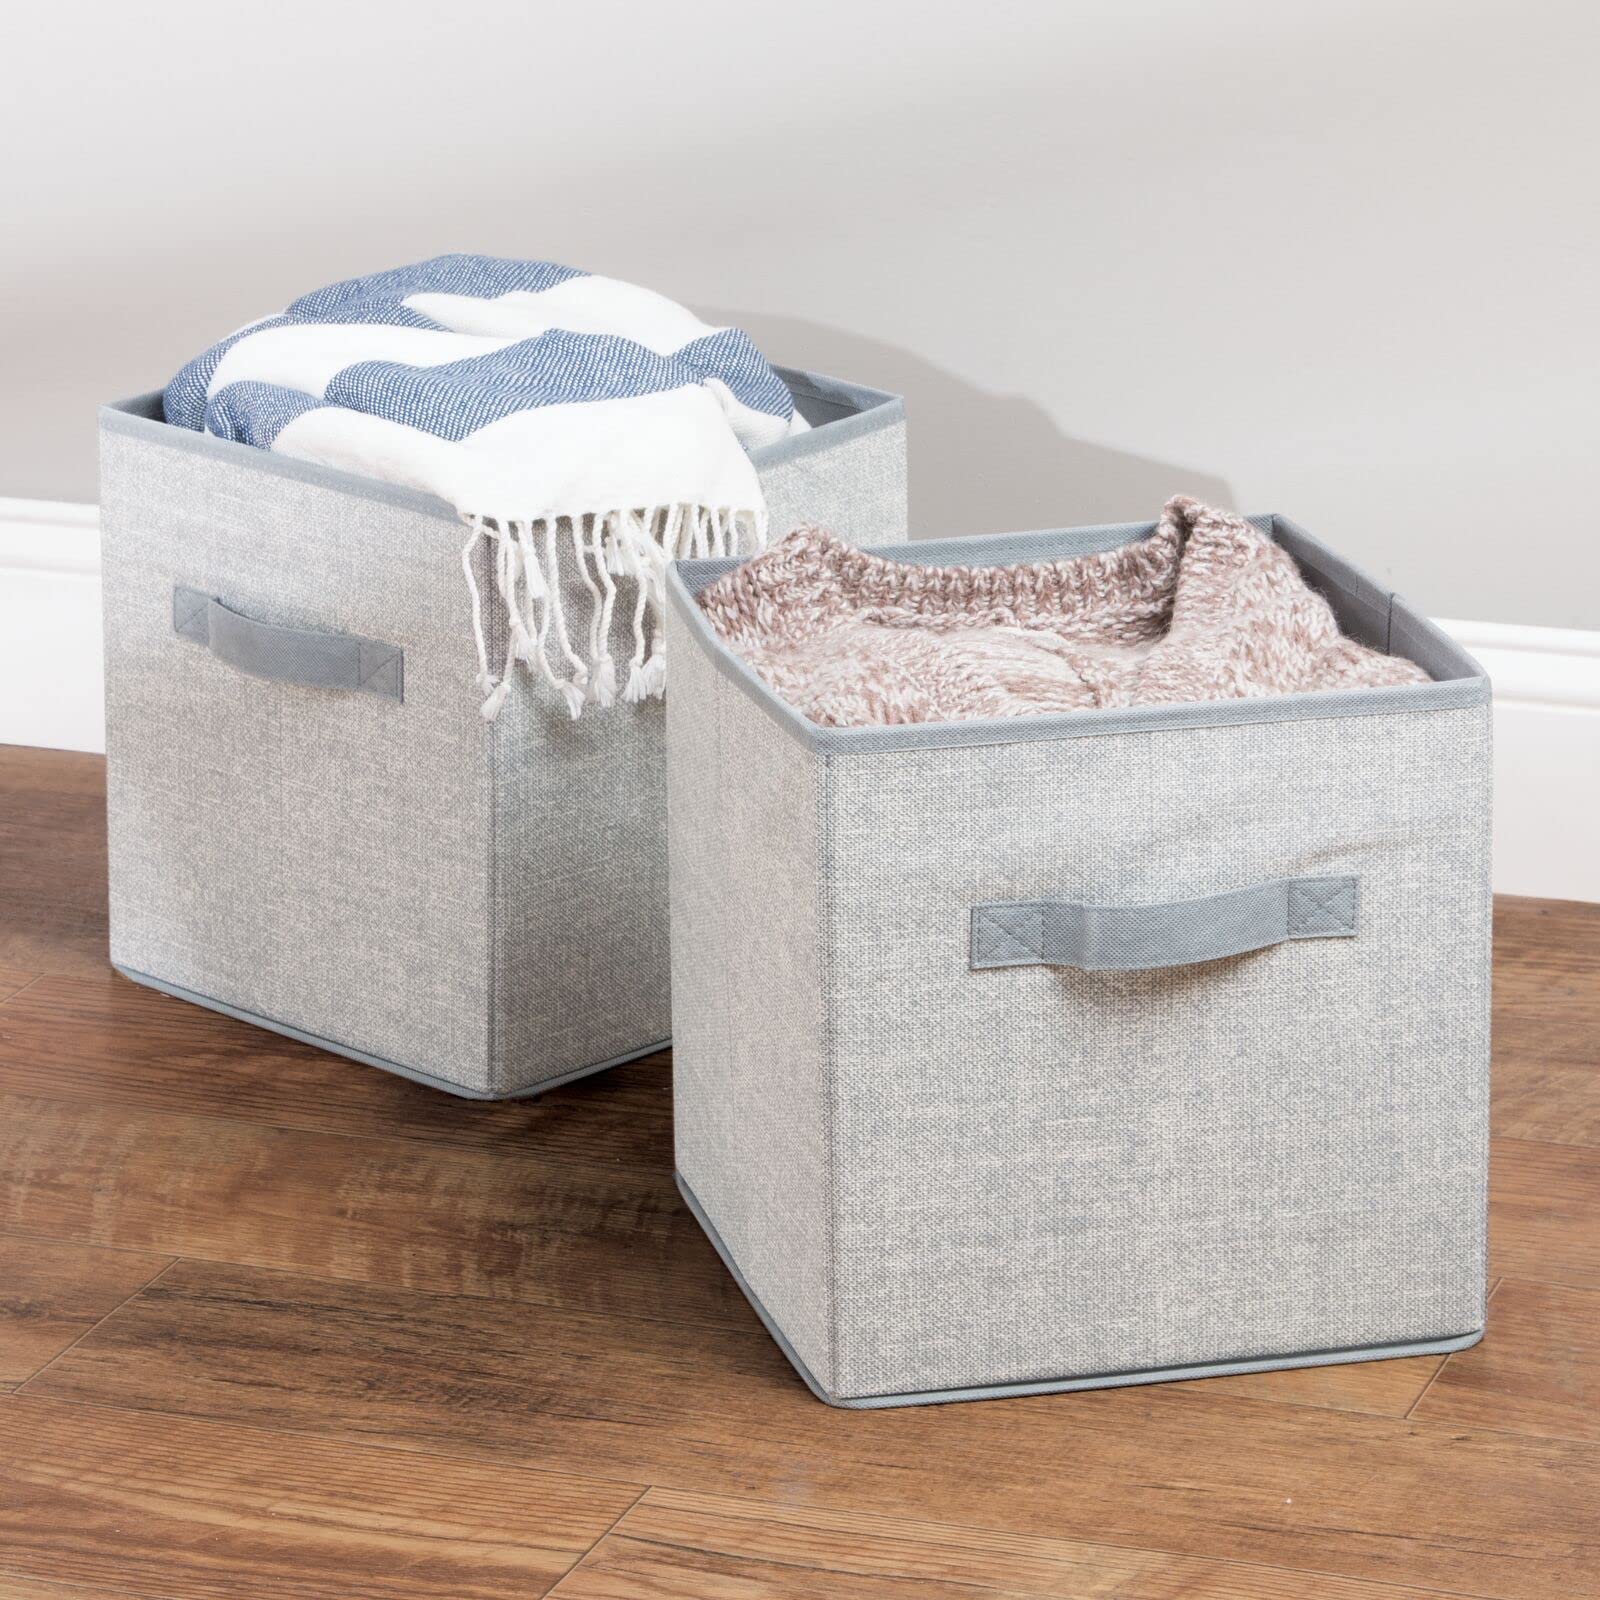 mDesign Small Fabric Collapsible Organizer Cube Bin Box with Front Handle for Cube Furniture Units, Closet or Bedroom Storage, Holds Clothing, Linens, Accessories - Lido Collection - 2 Pack - Gray